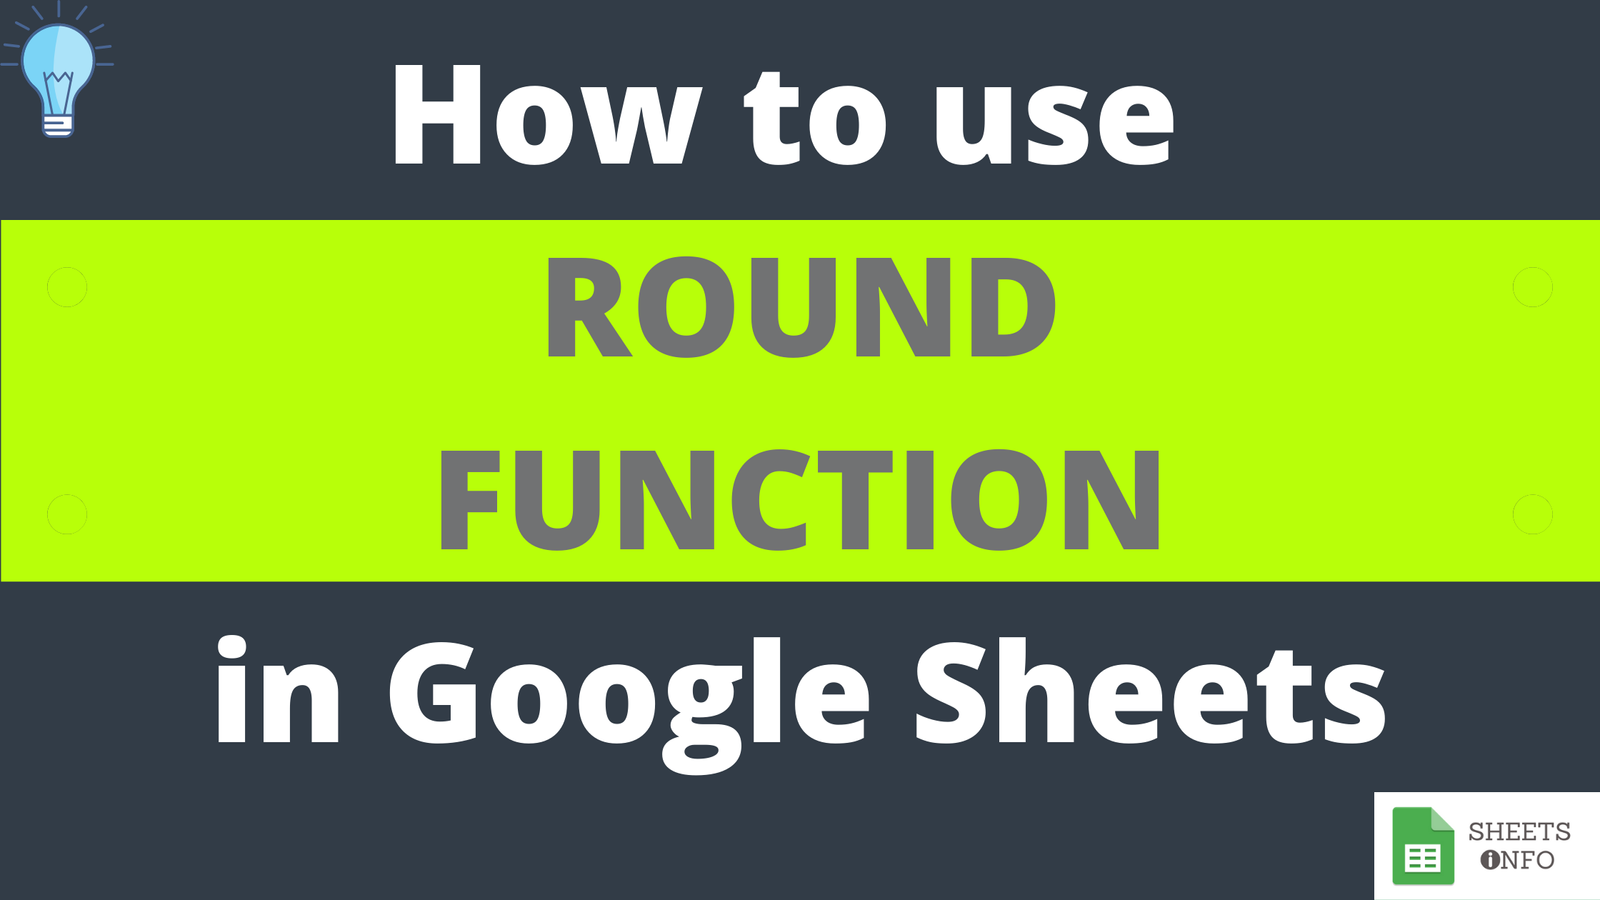 ROUND Function in Google Sheets